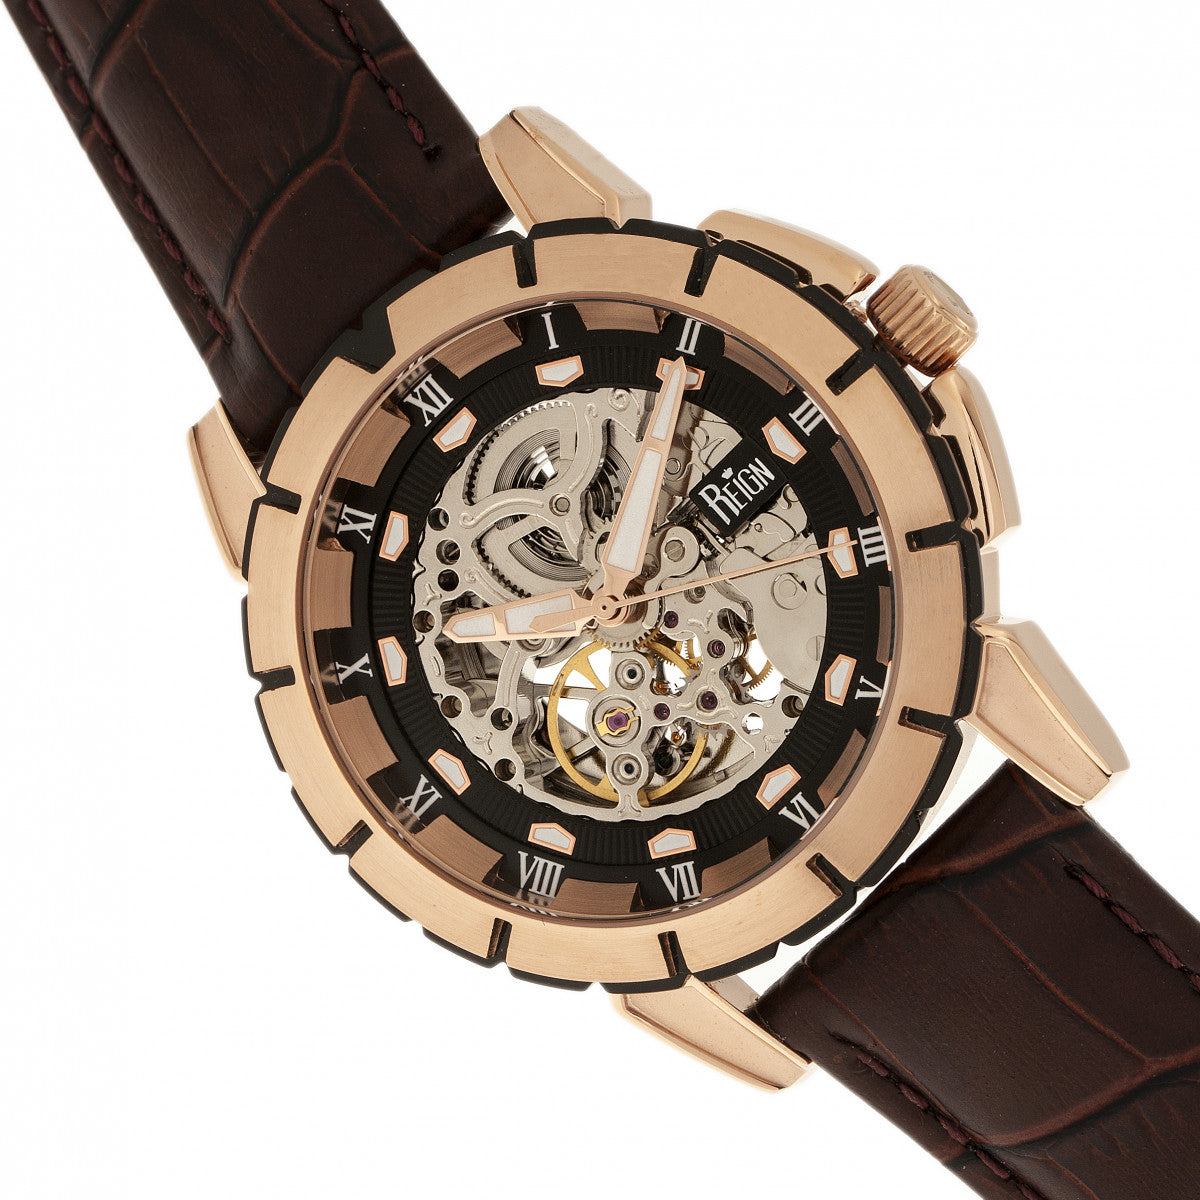 Reign Philippe Automatic Skeleton Leather-Band Watch - Rose Gold/Black - REIRN4606